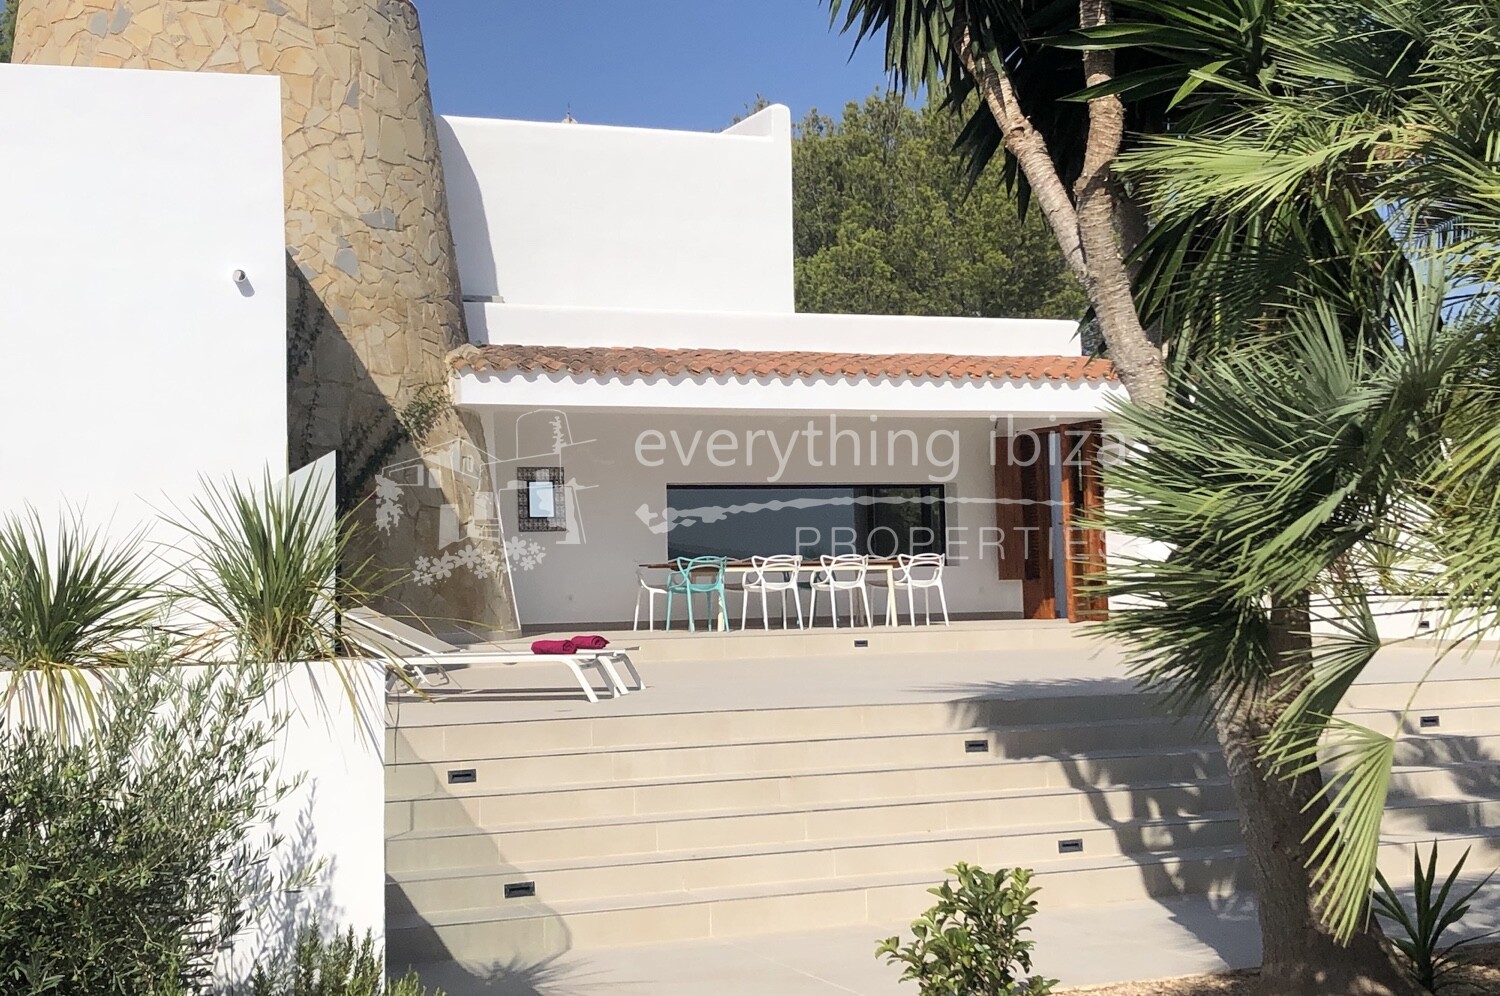 Elegant Modernised Villa with Super Sea Views, ref. 1470, for sale in Ibiza by everything ibiza Properties